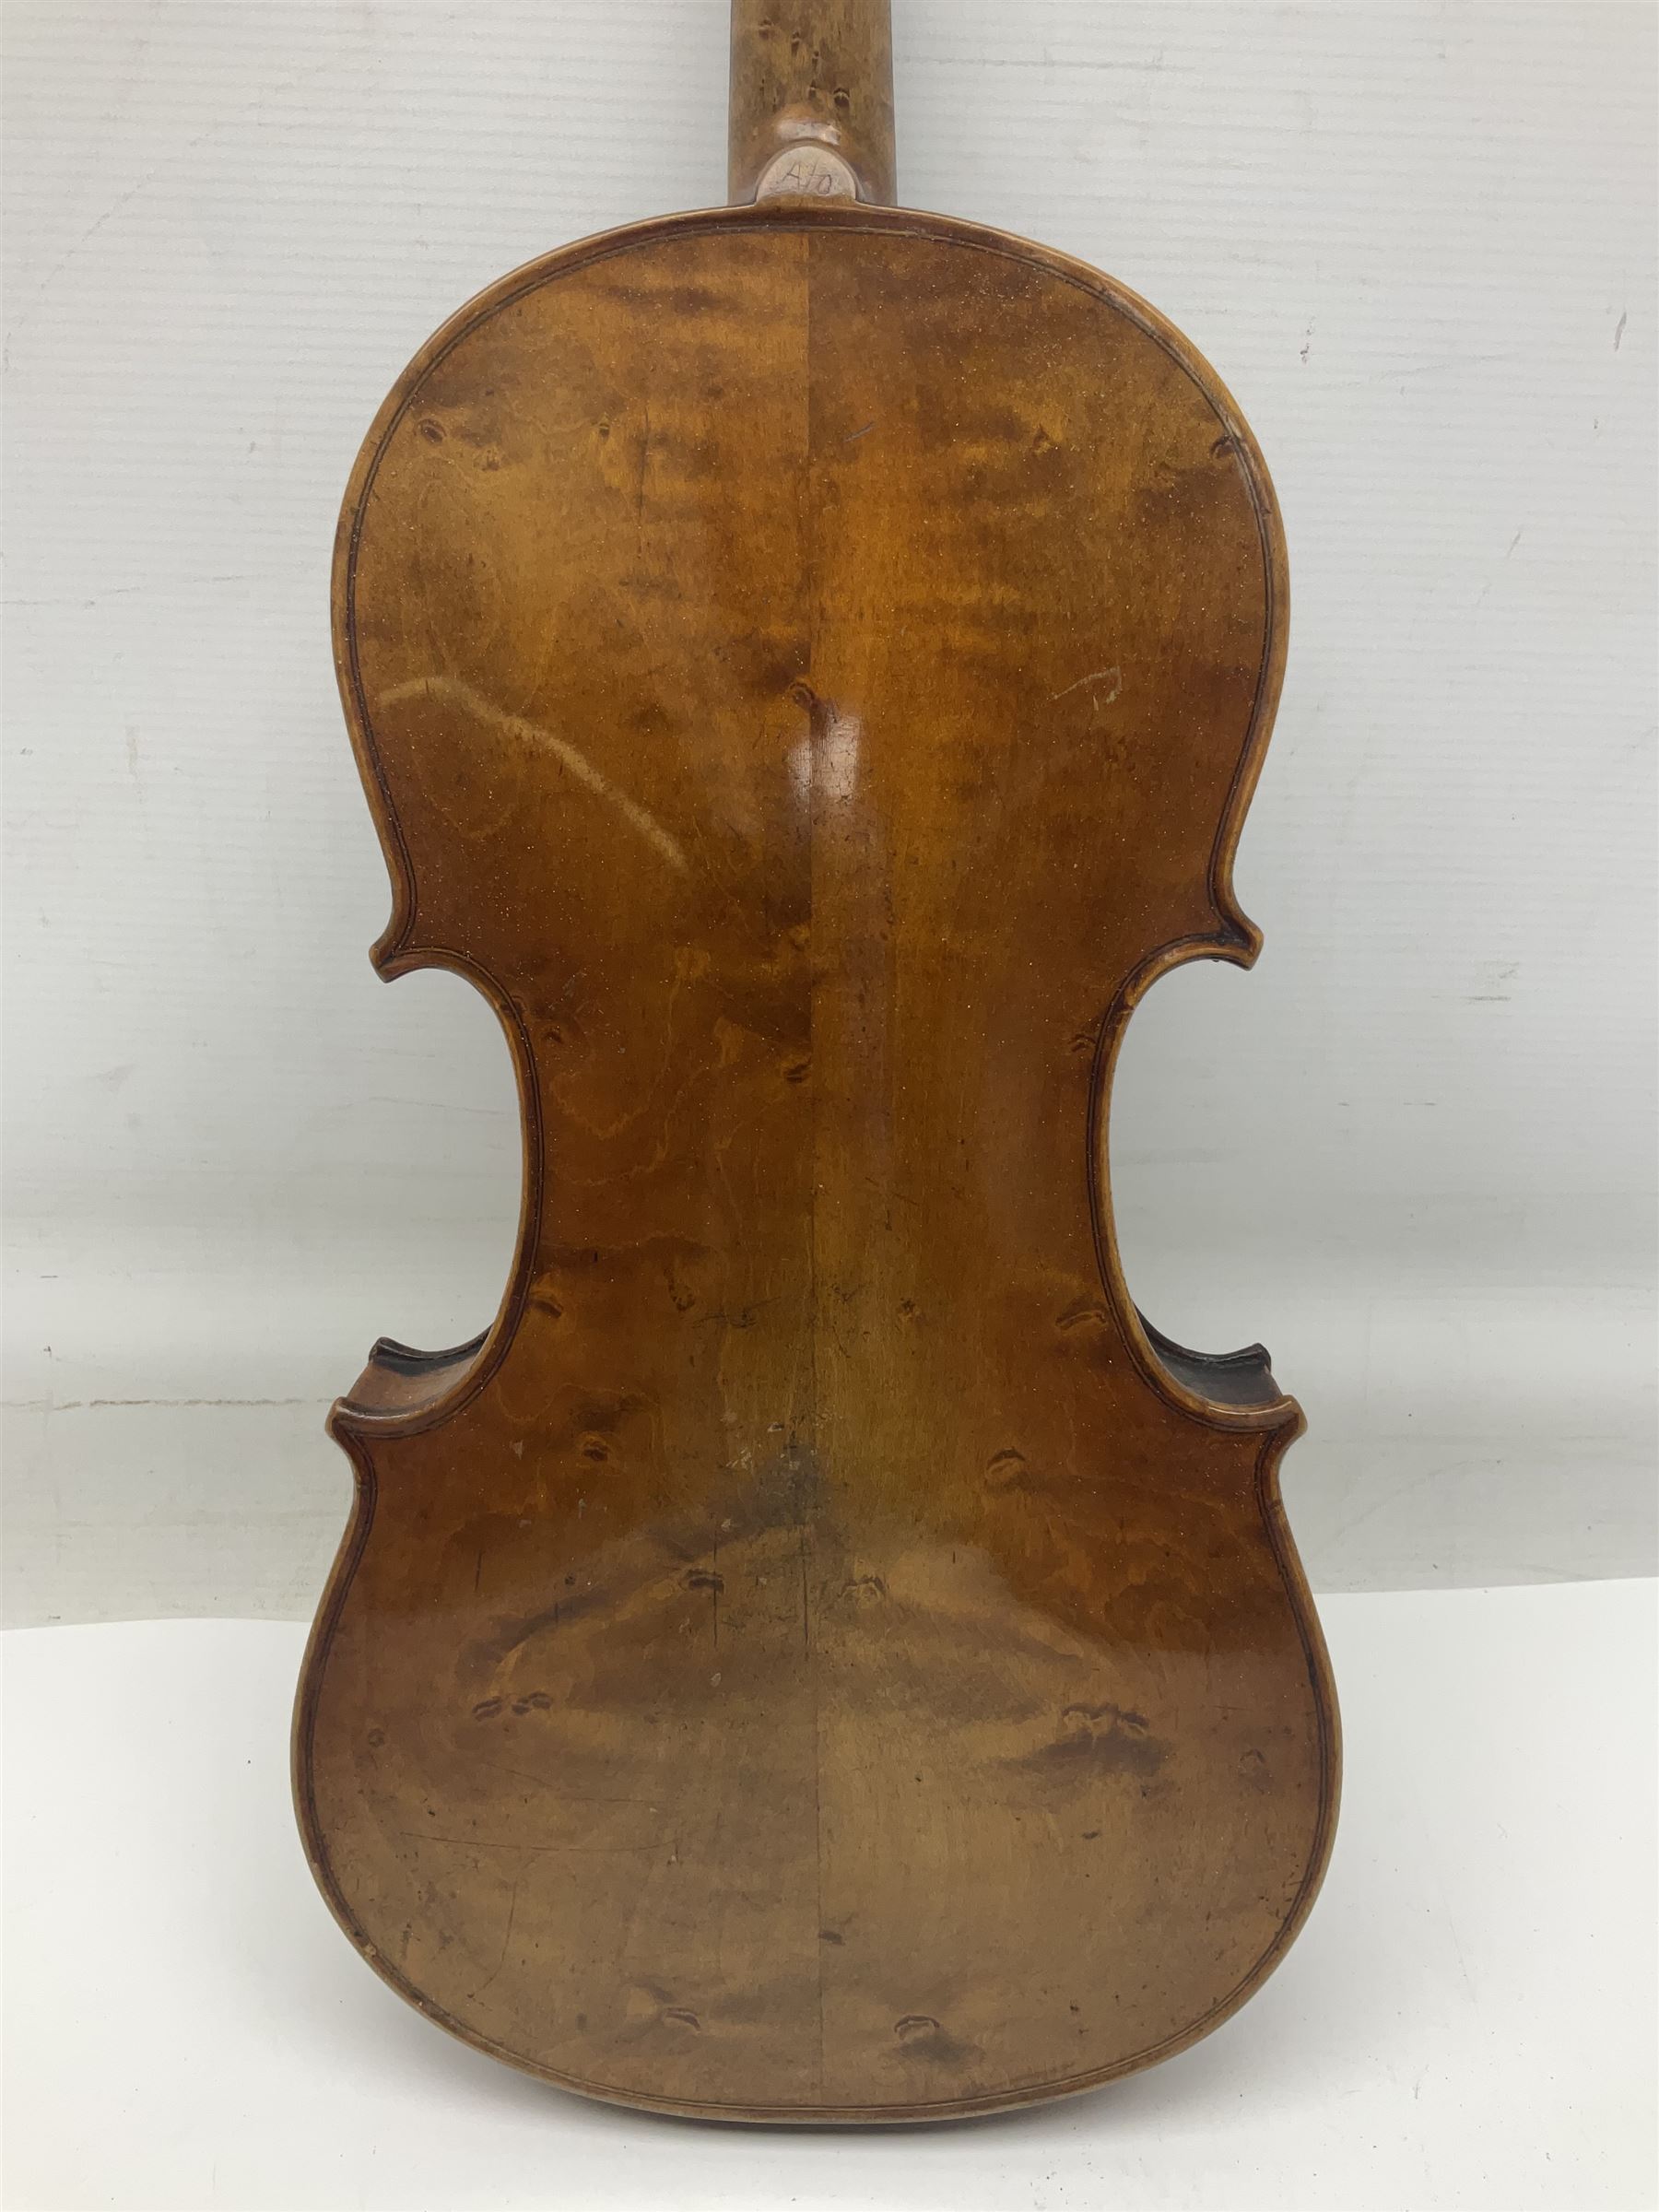 Late 19th century German trade violin c1890 with 36cm two-piece birds-eye maple back - Image 3 of 17